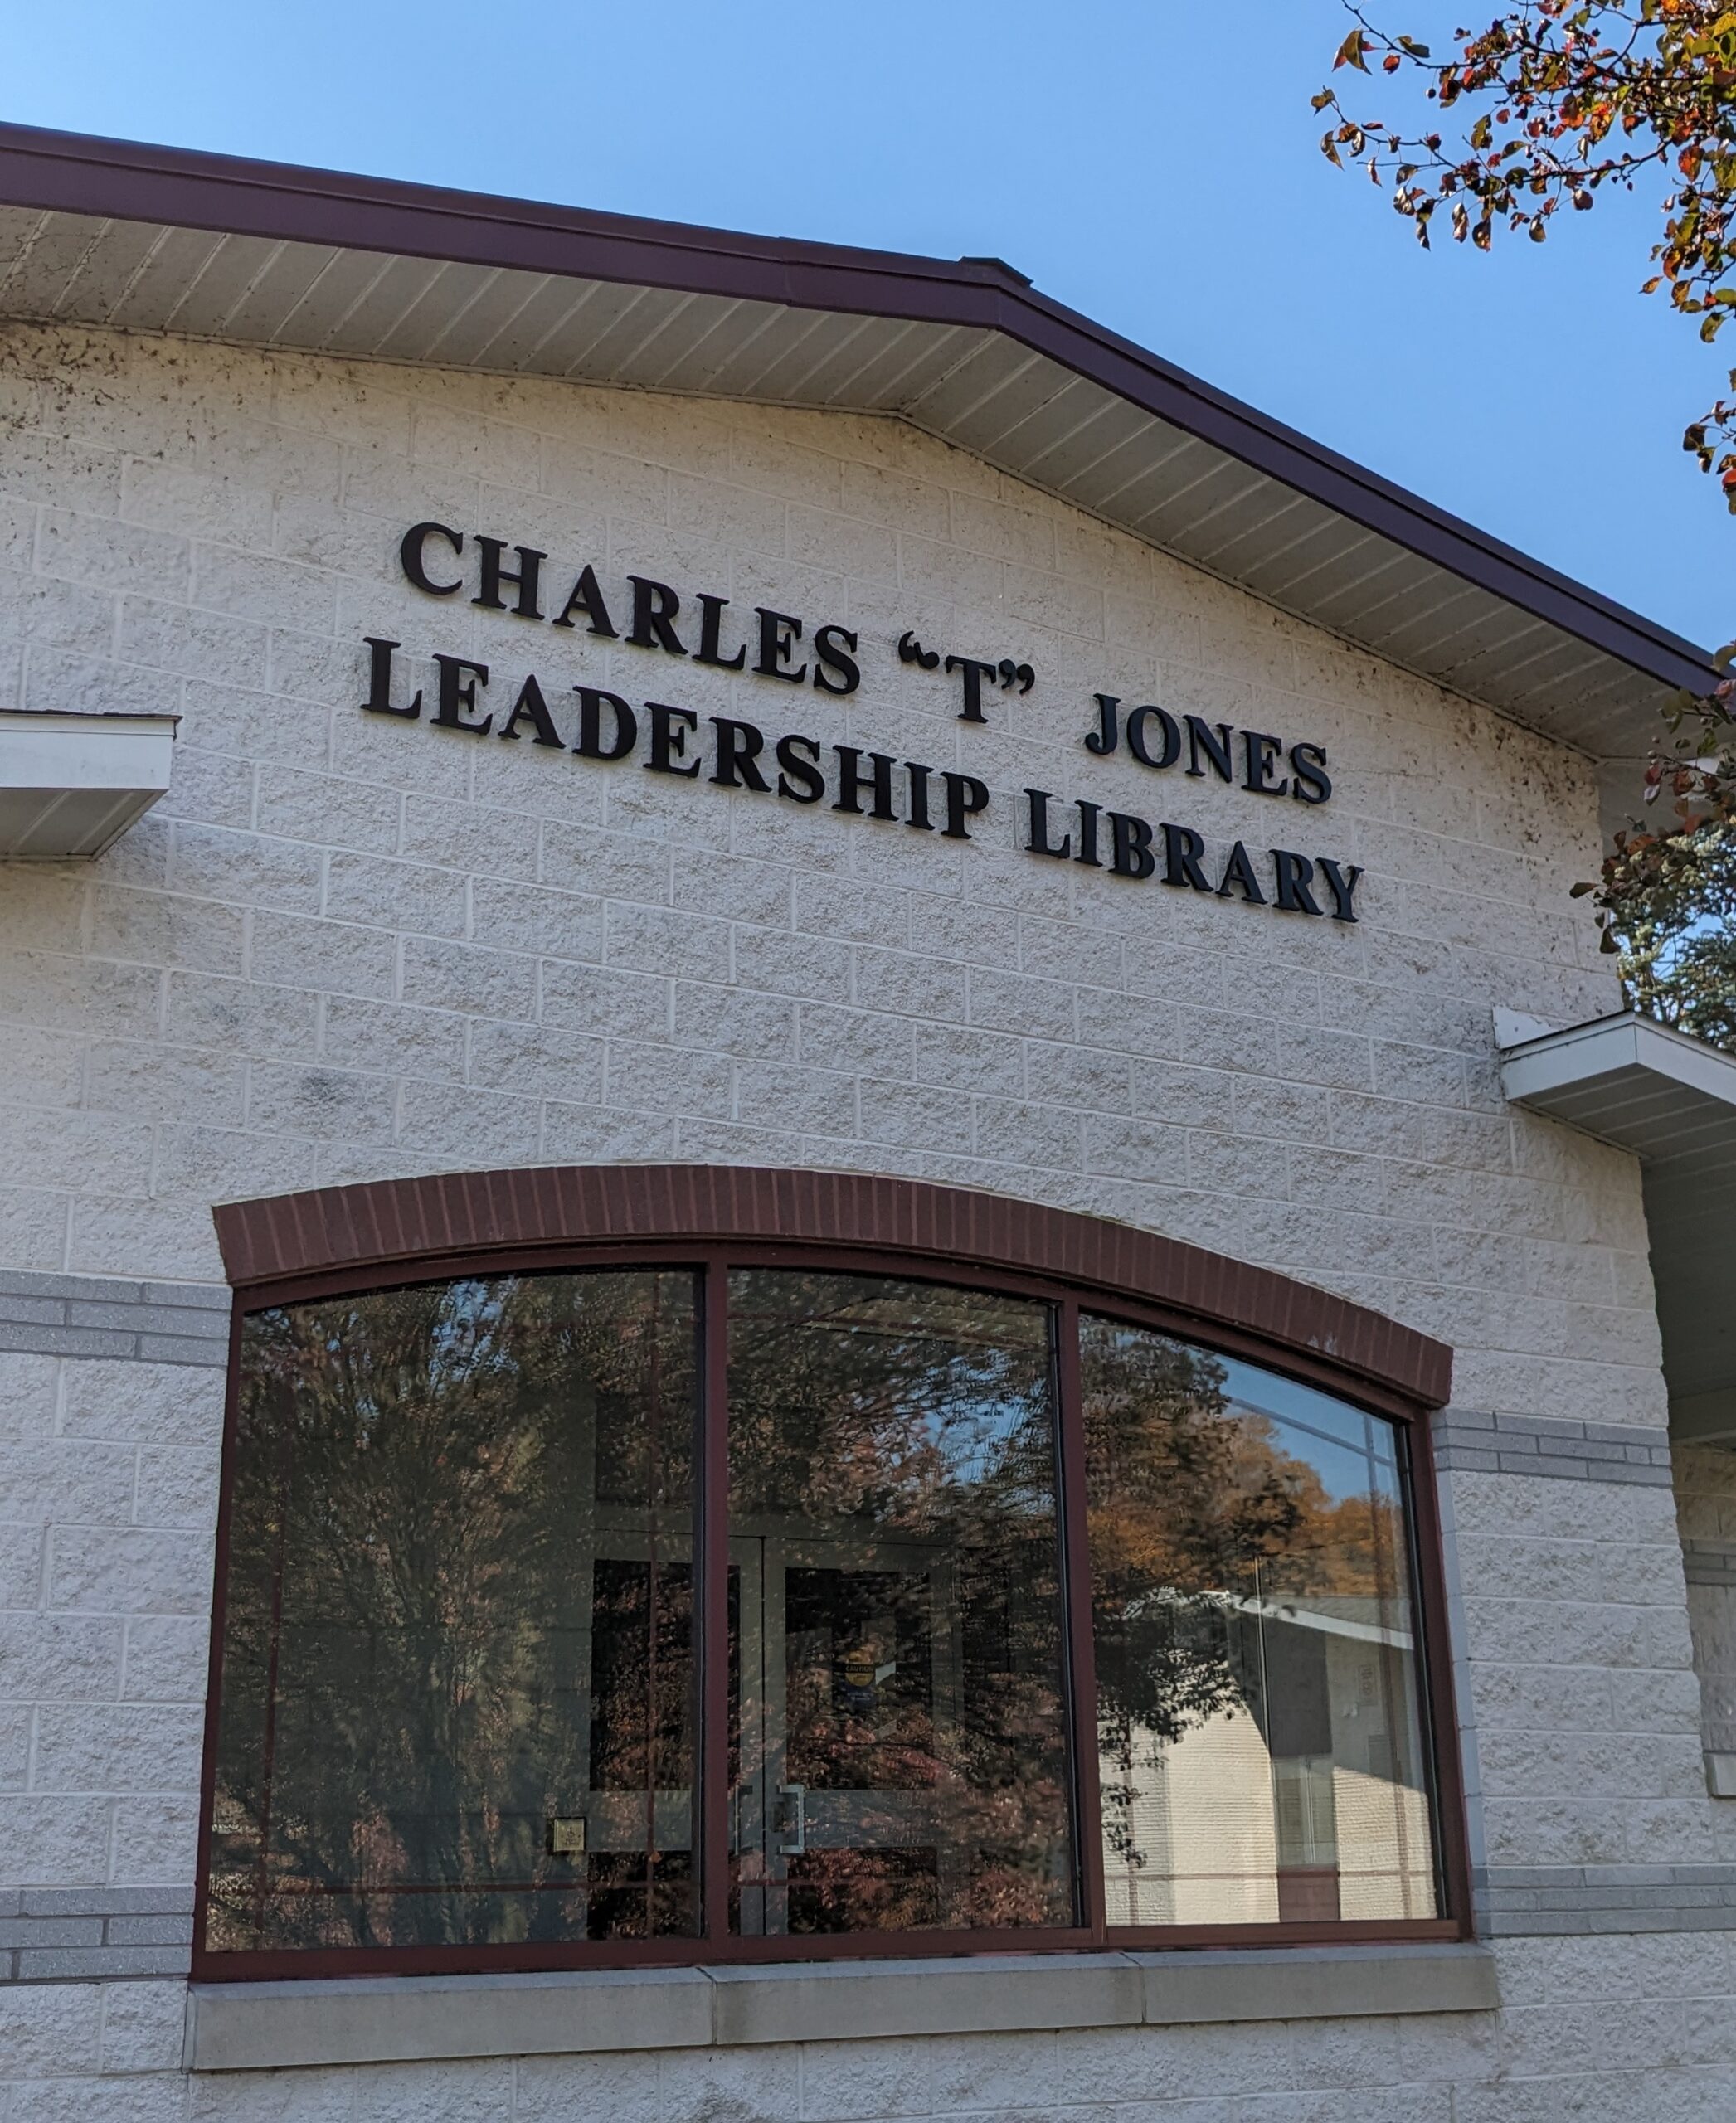 Exterior, mostly white, of the Charles "T" Jones Leadership Library at Central Penn College